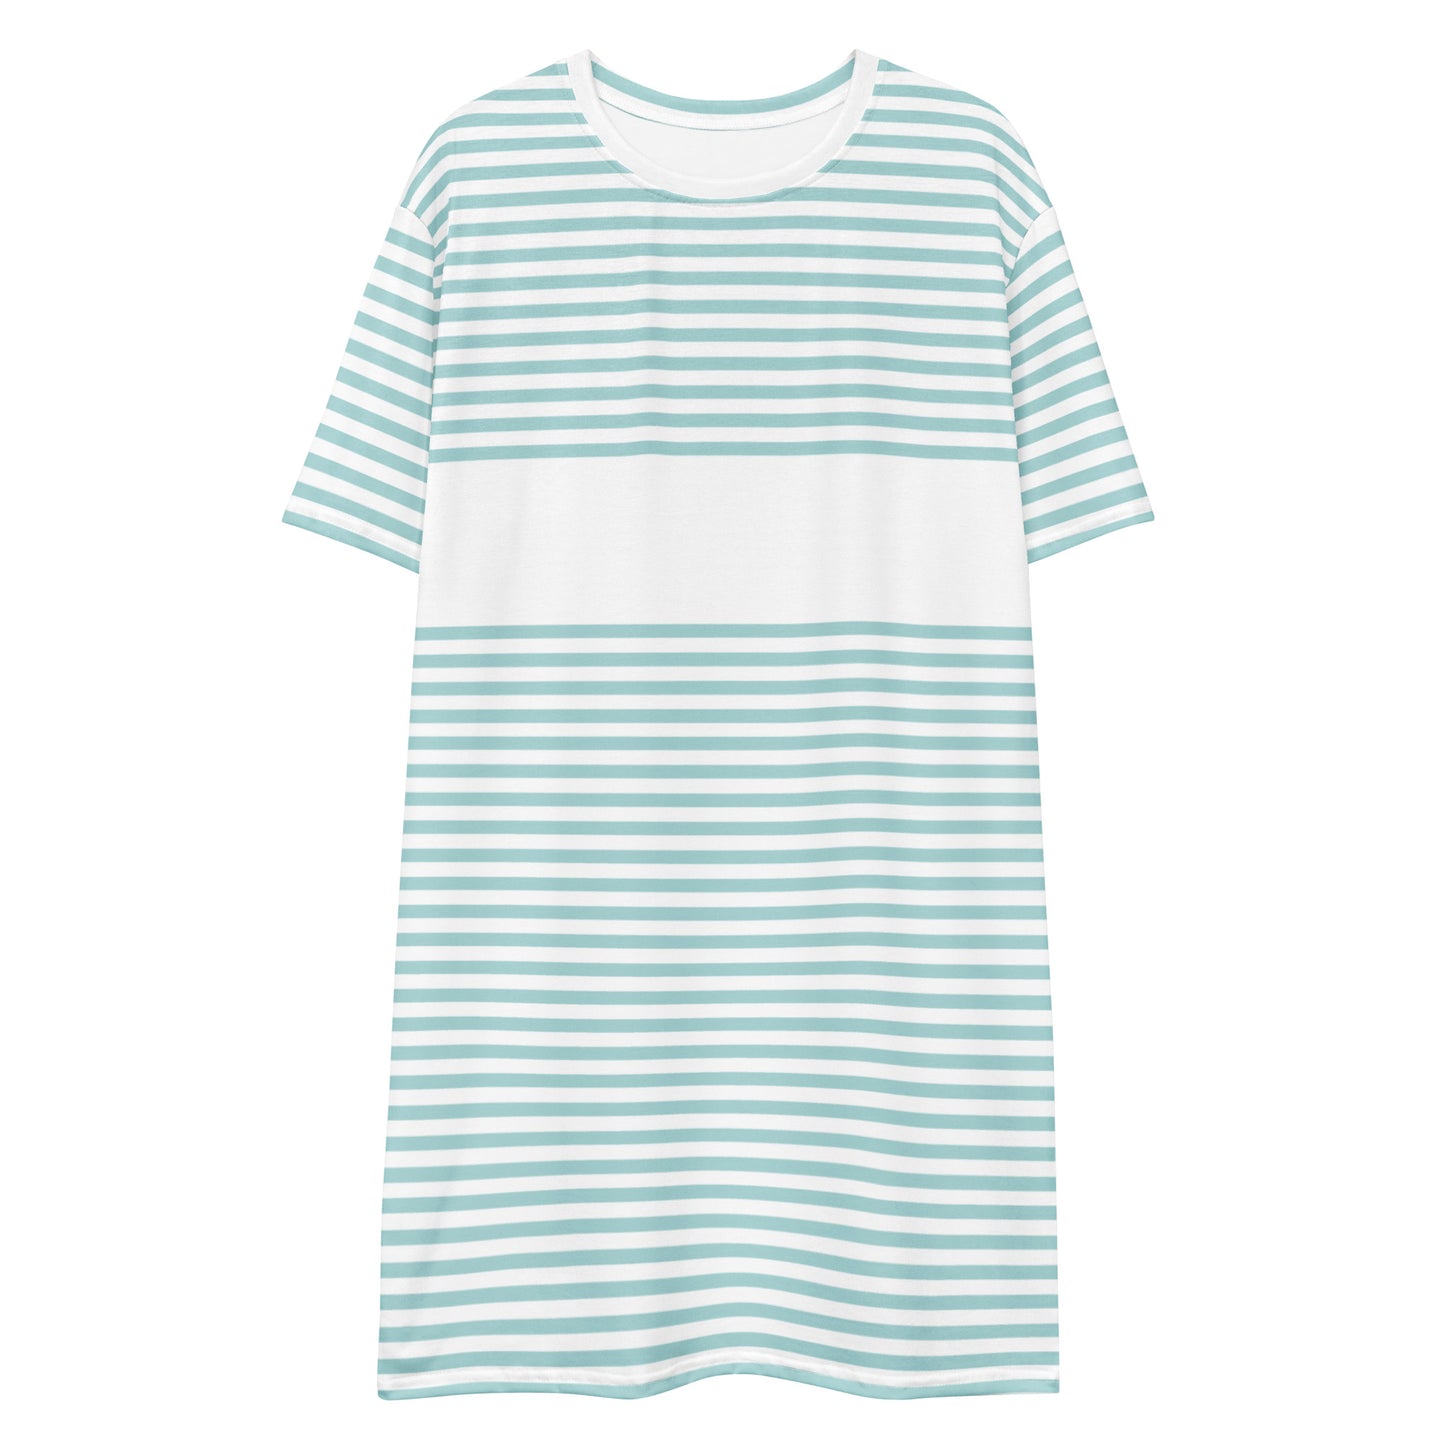 Breezy - Inspired By Taylor Swift - Sustainably Made T-shirt dress